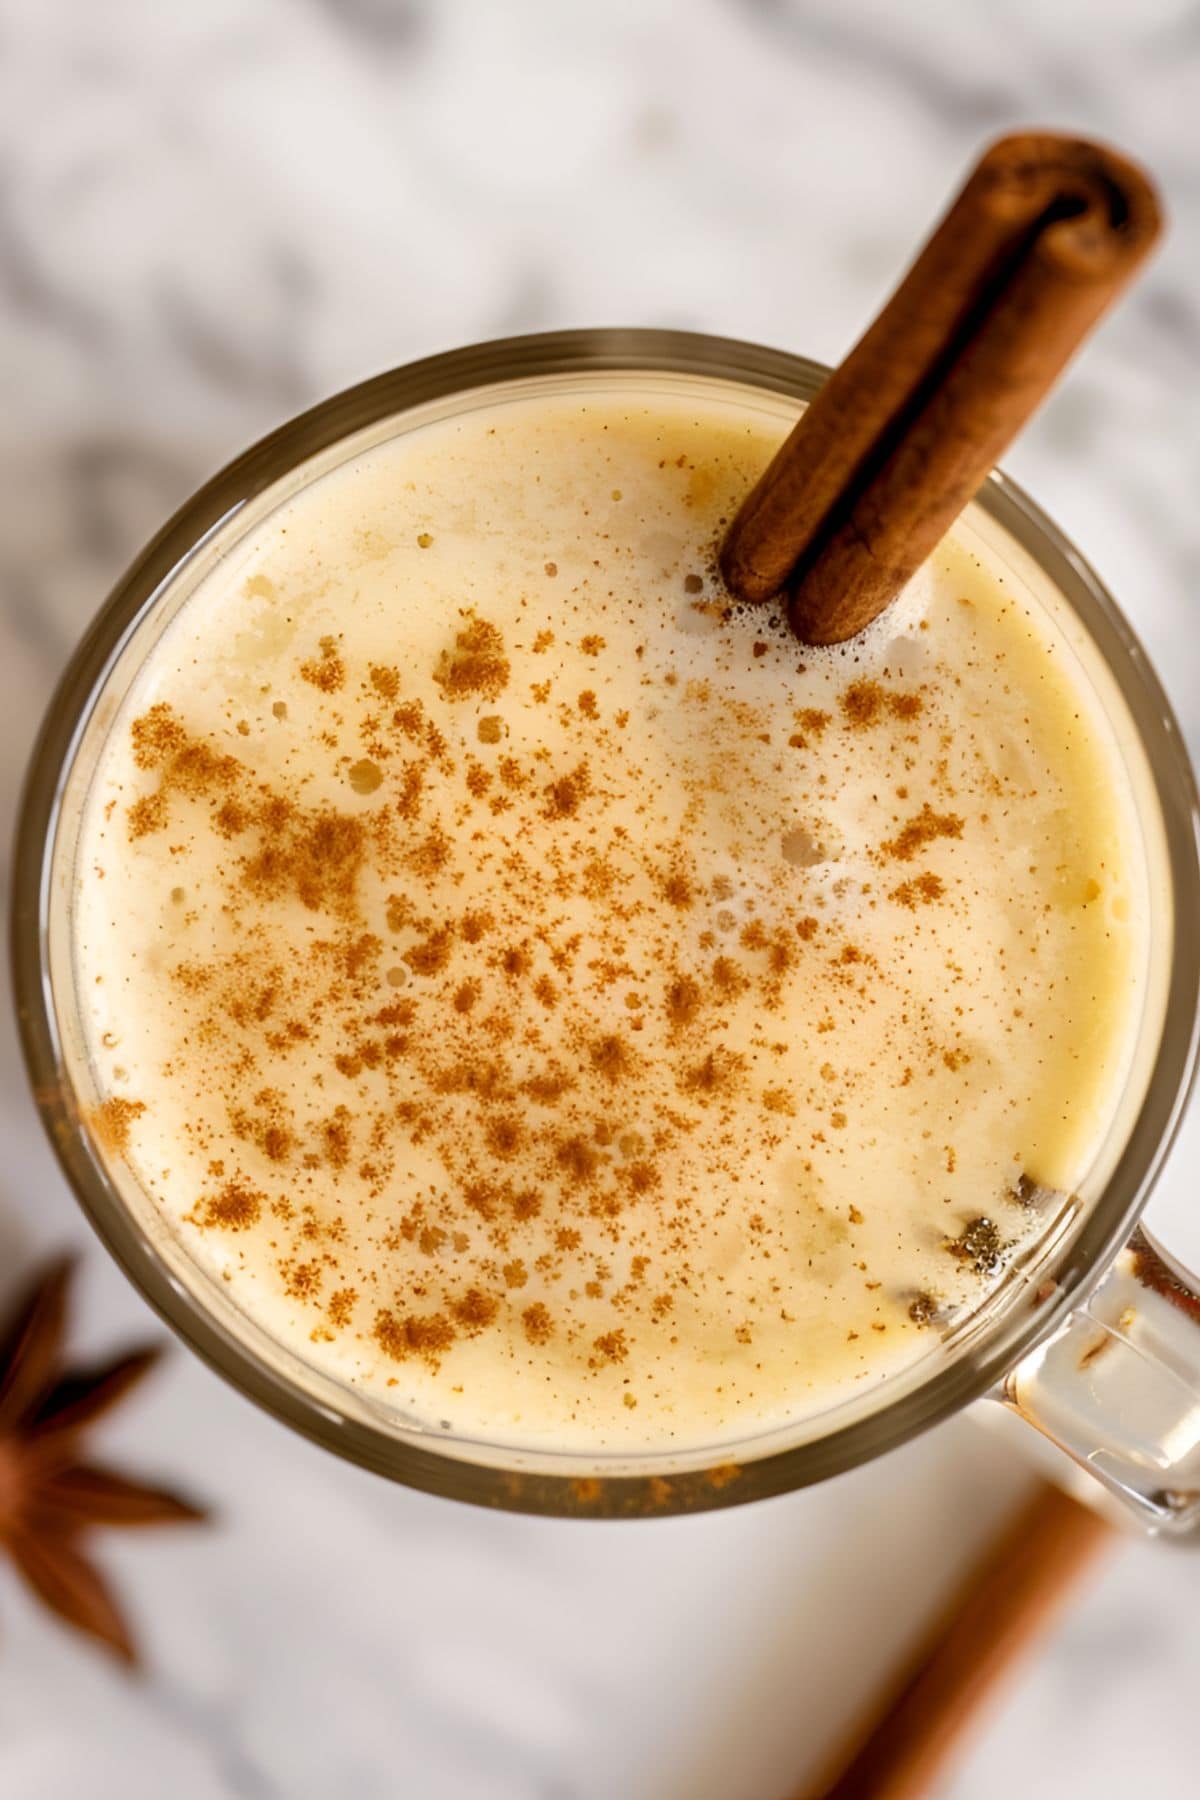 Super Close Top View of Hot Buttered Rum in a Glass with a Dusting of Cinnamon, Garnished with a Cinnamon Stick